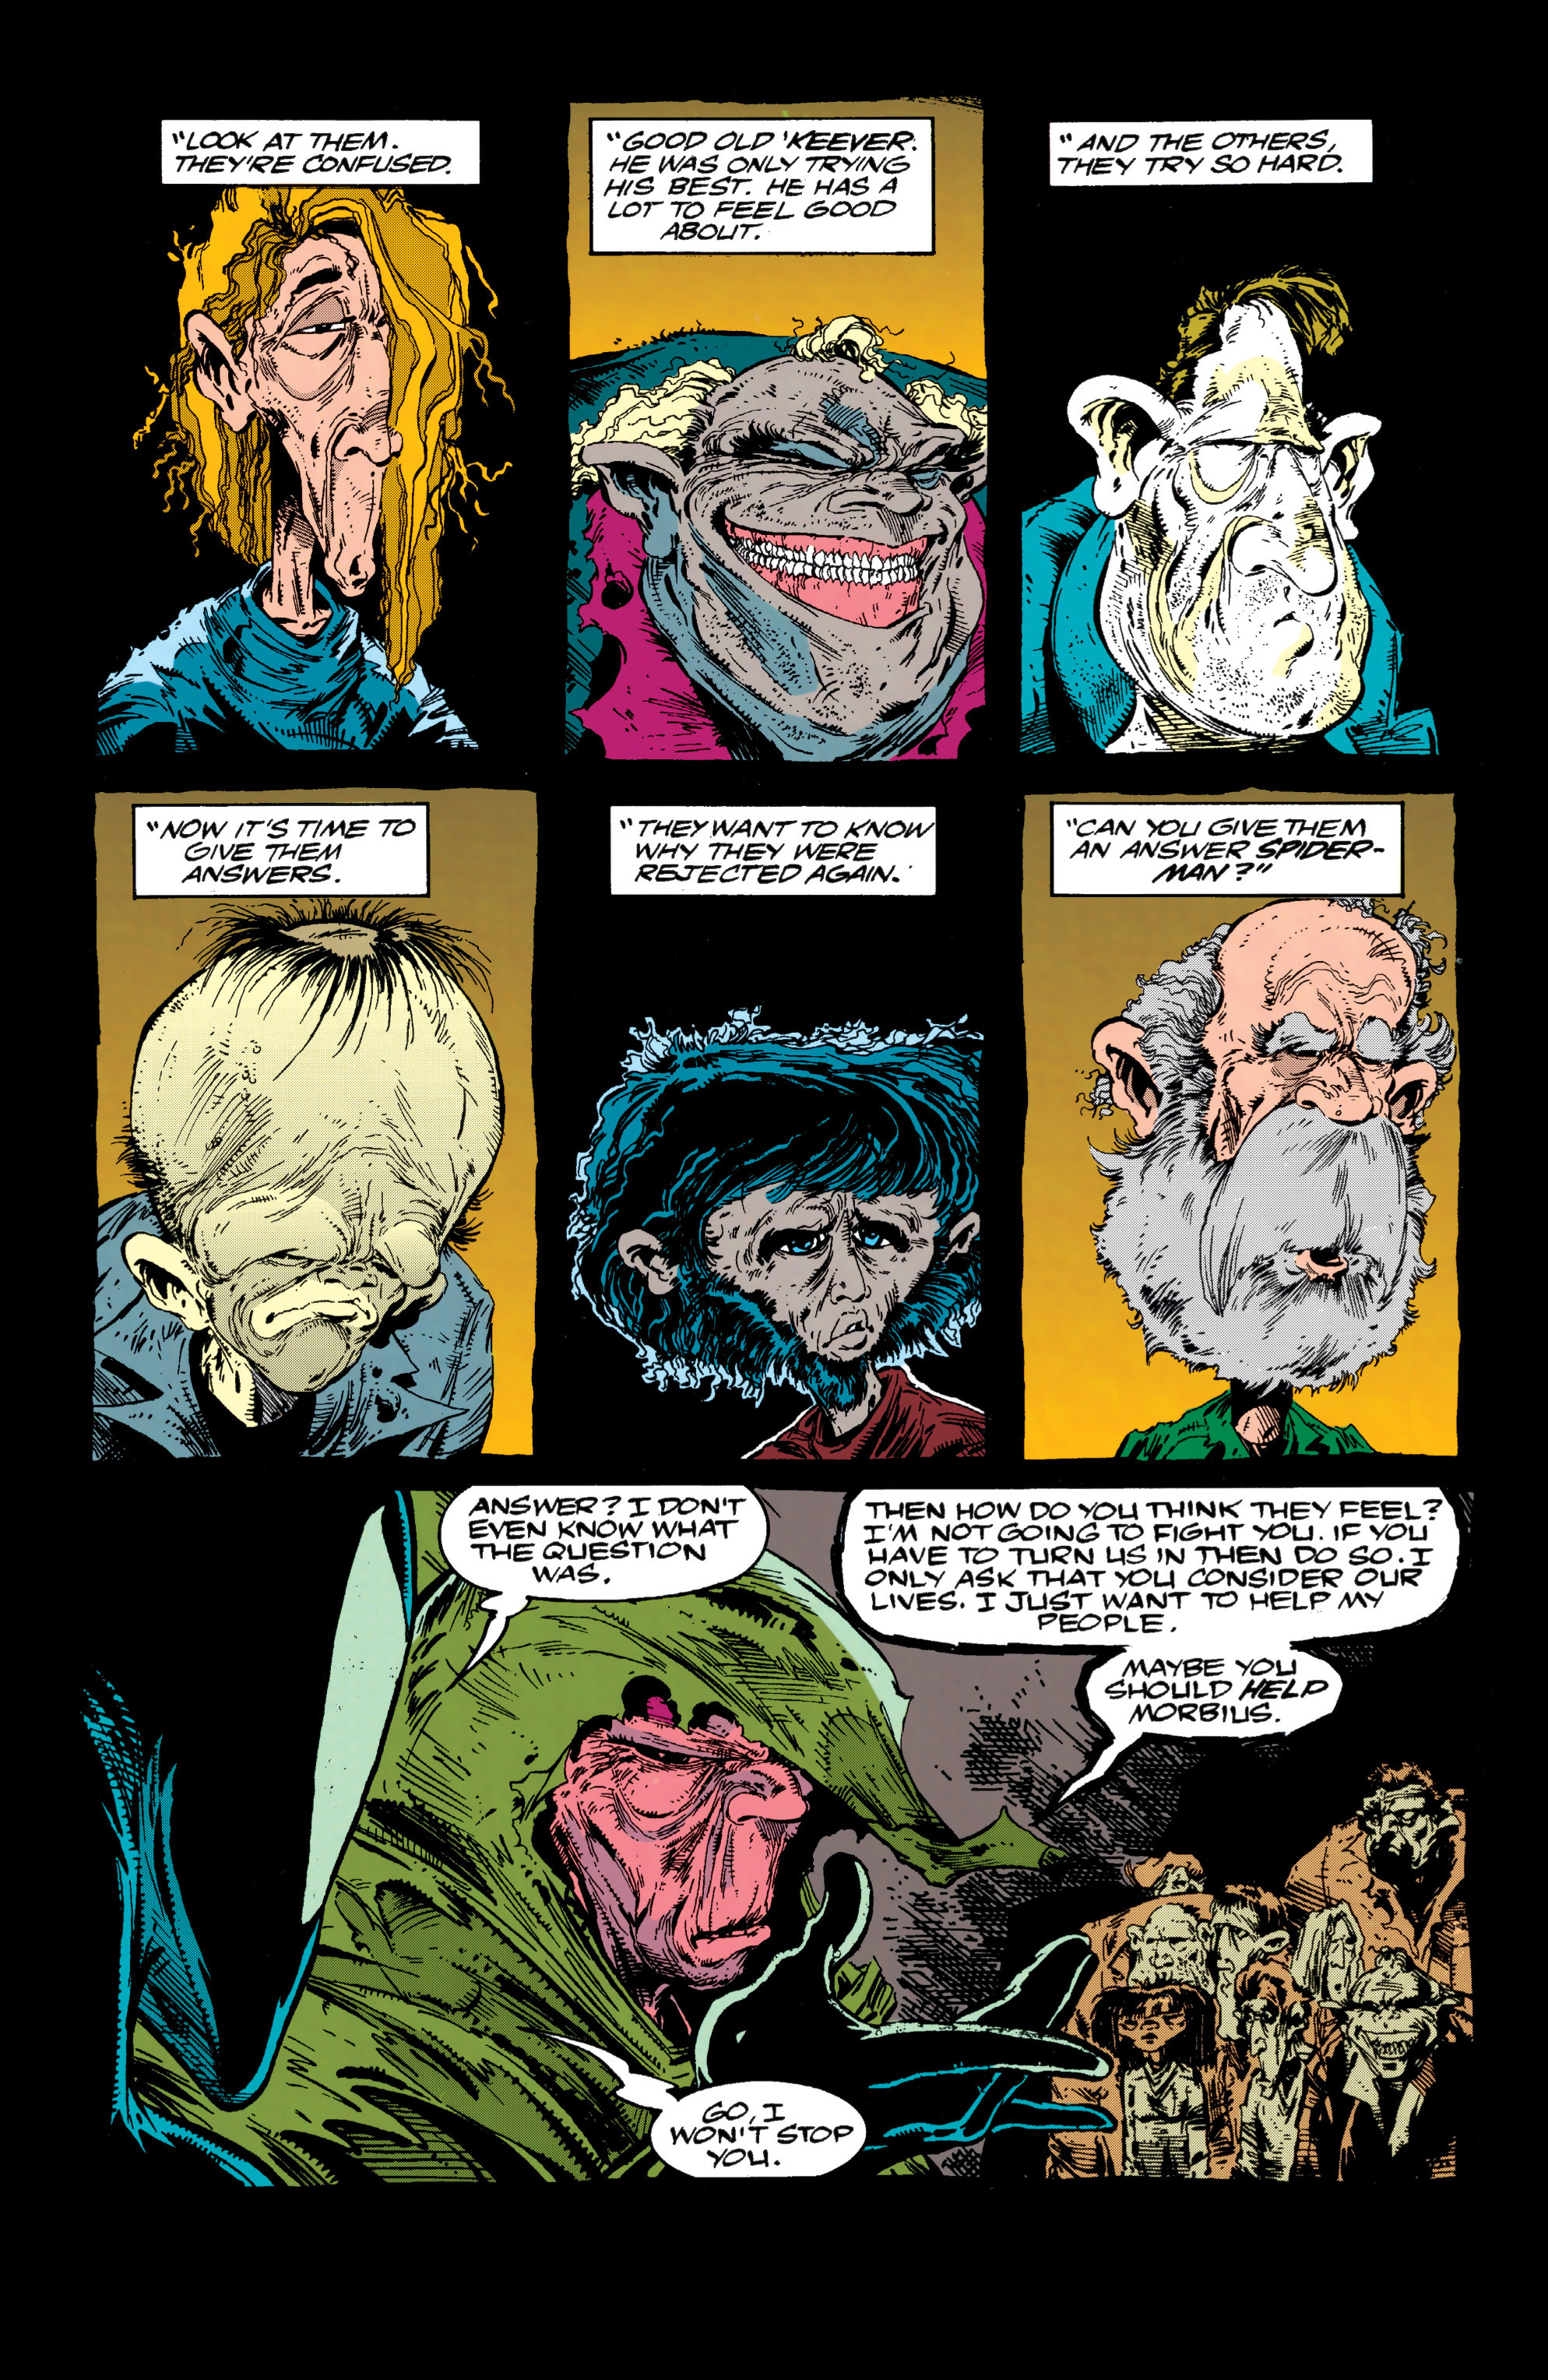 Spider-Man (1990) 14_-_Sub_City_Part_2_of_2 Page 19